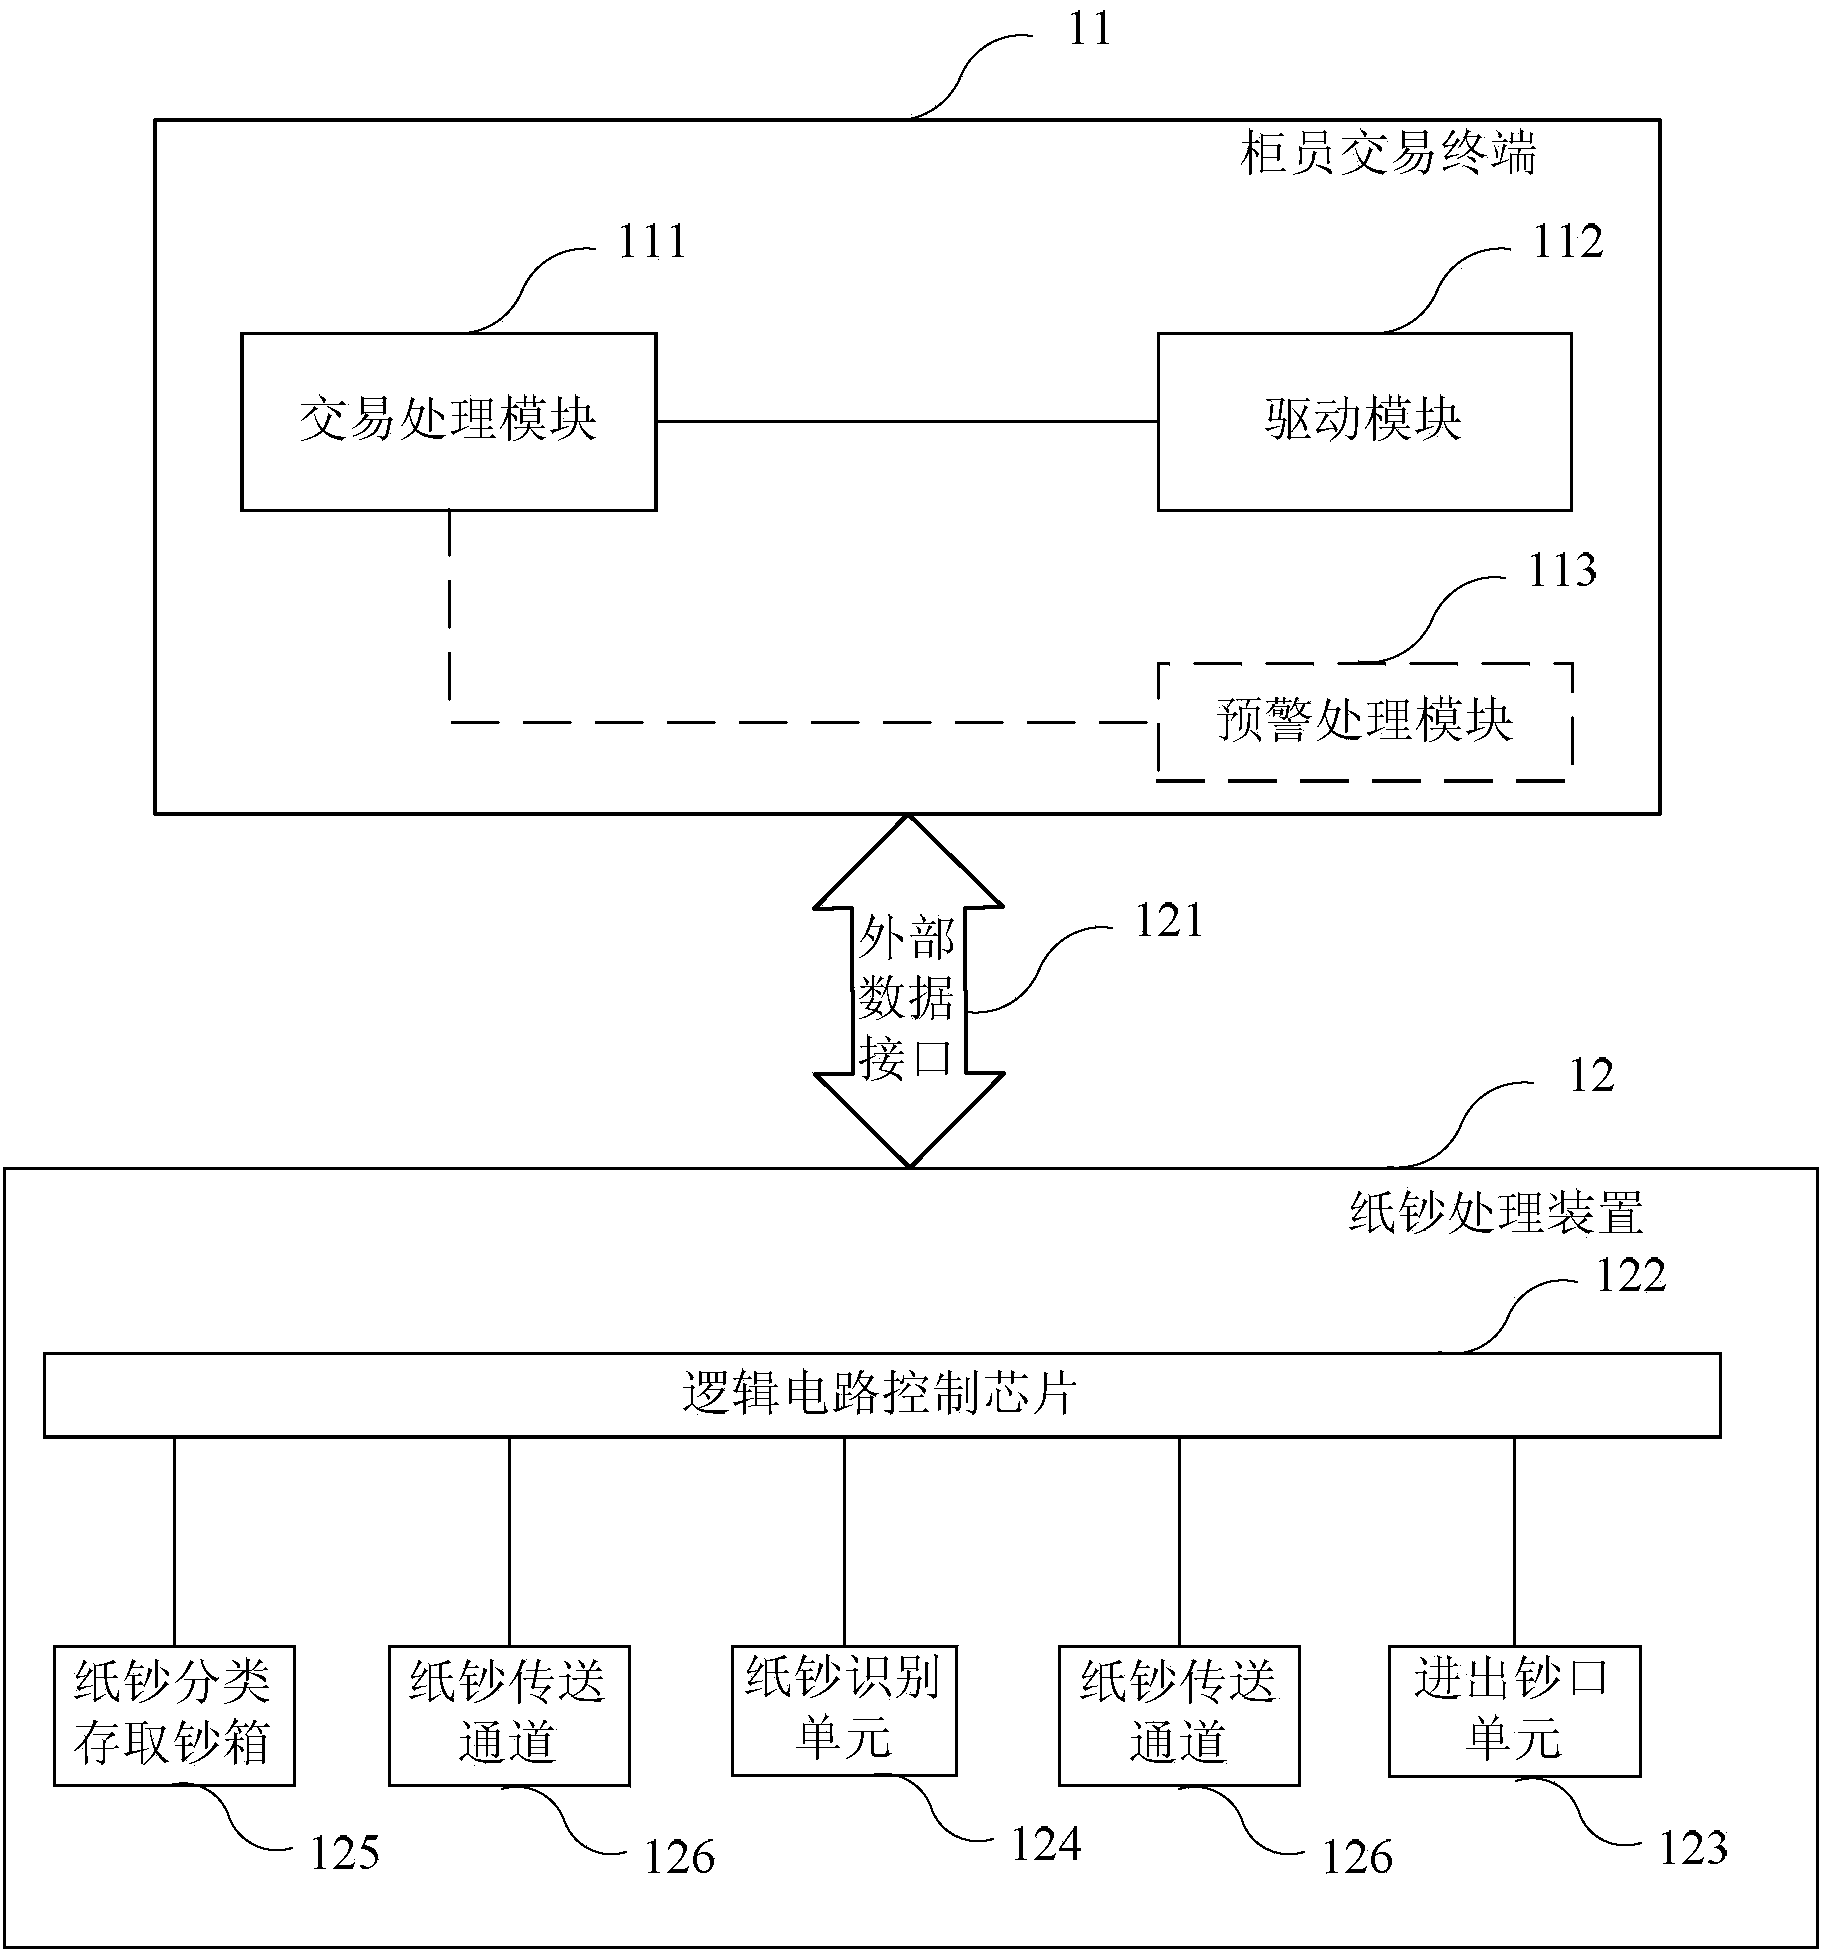 Linkage bill processing and pre-warning system